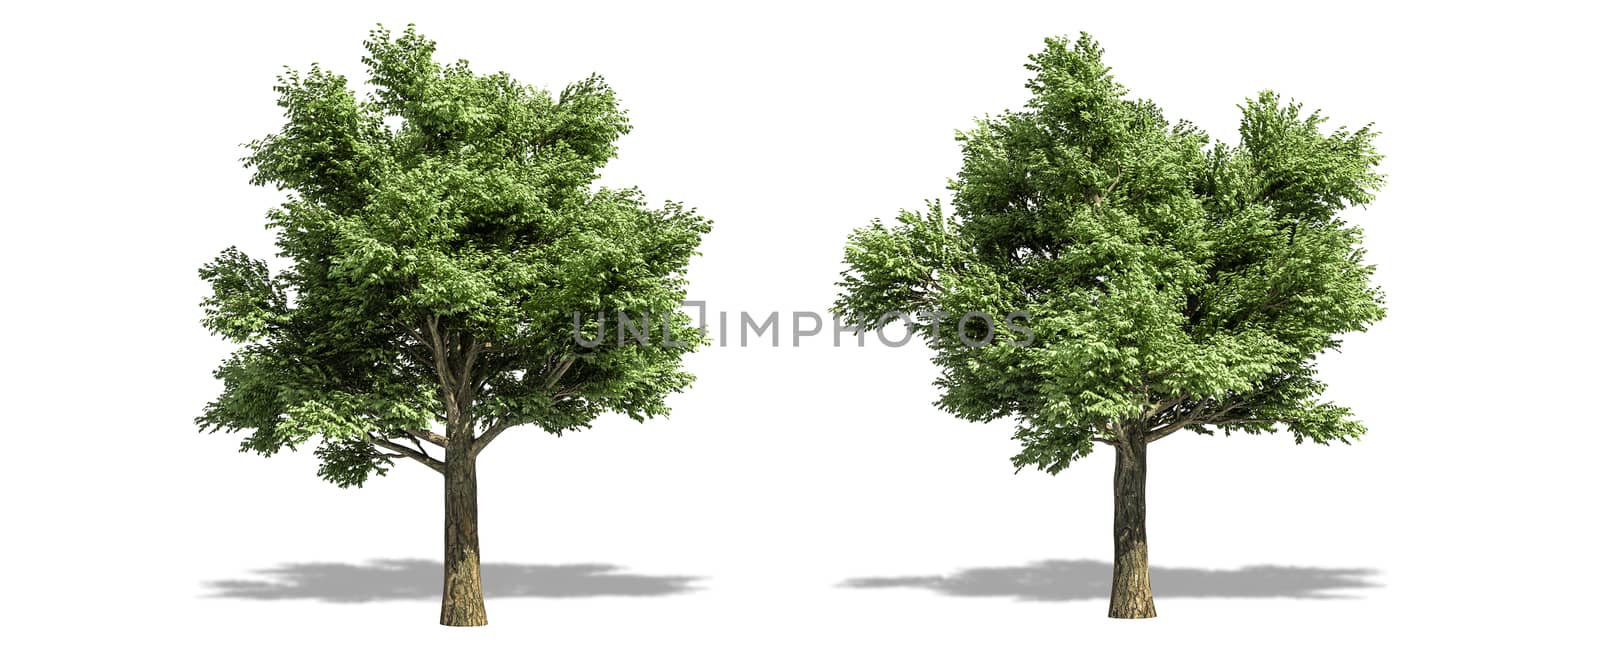 Beautiful Quercus petraea tree isolated and cutting on a white background with clipping path.